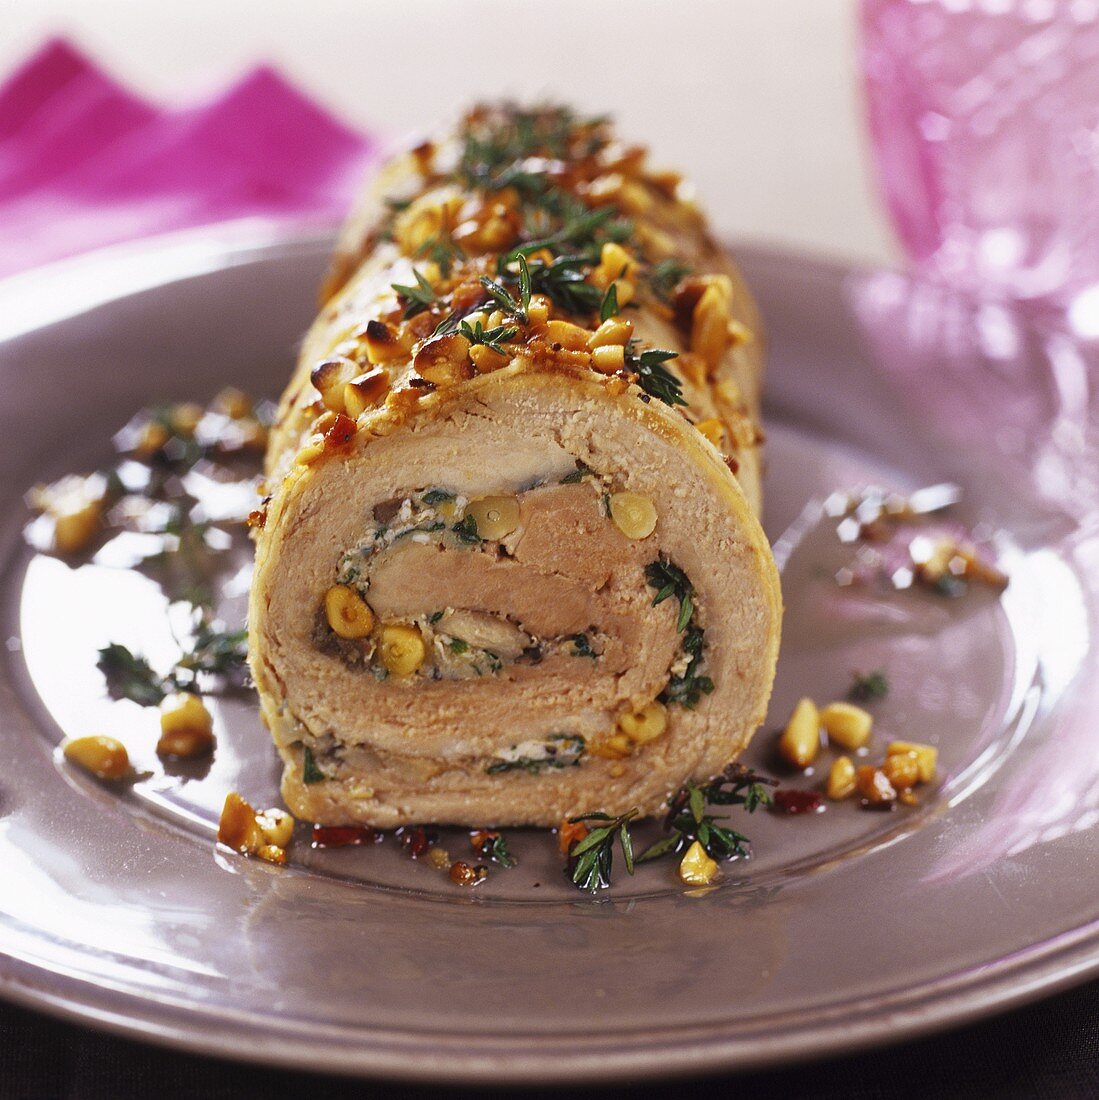 Rolled pork roast with herbs and pine nuts